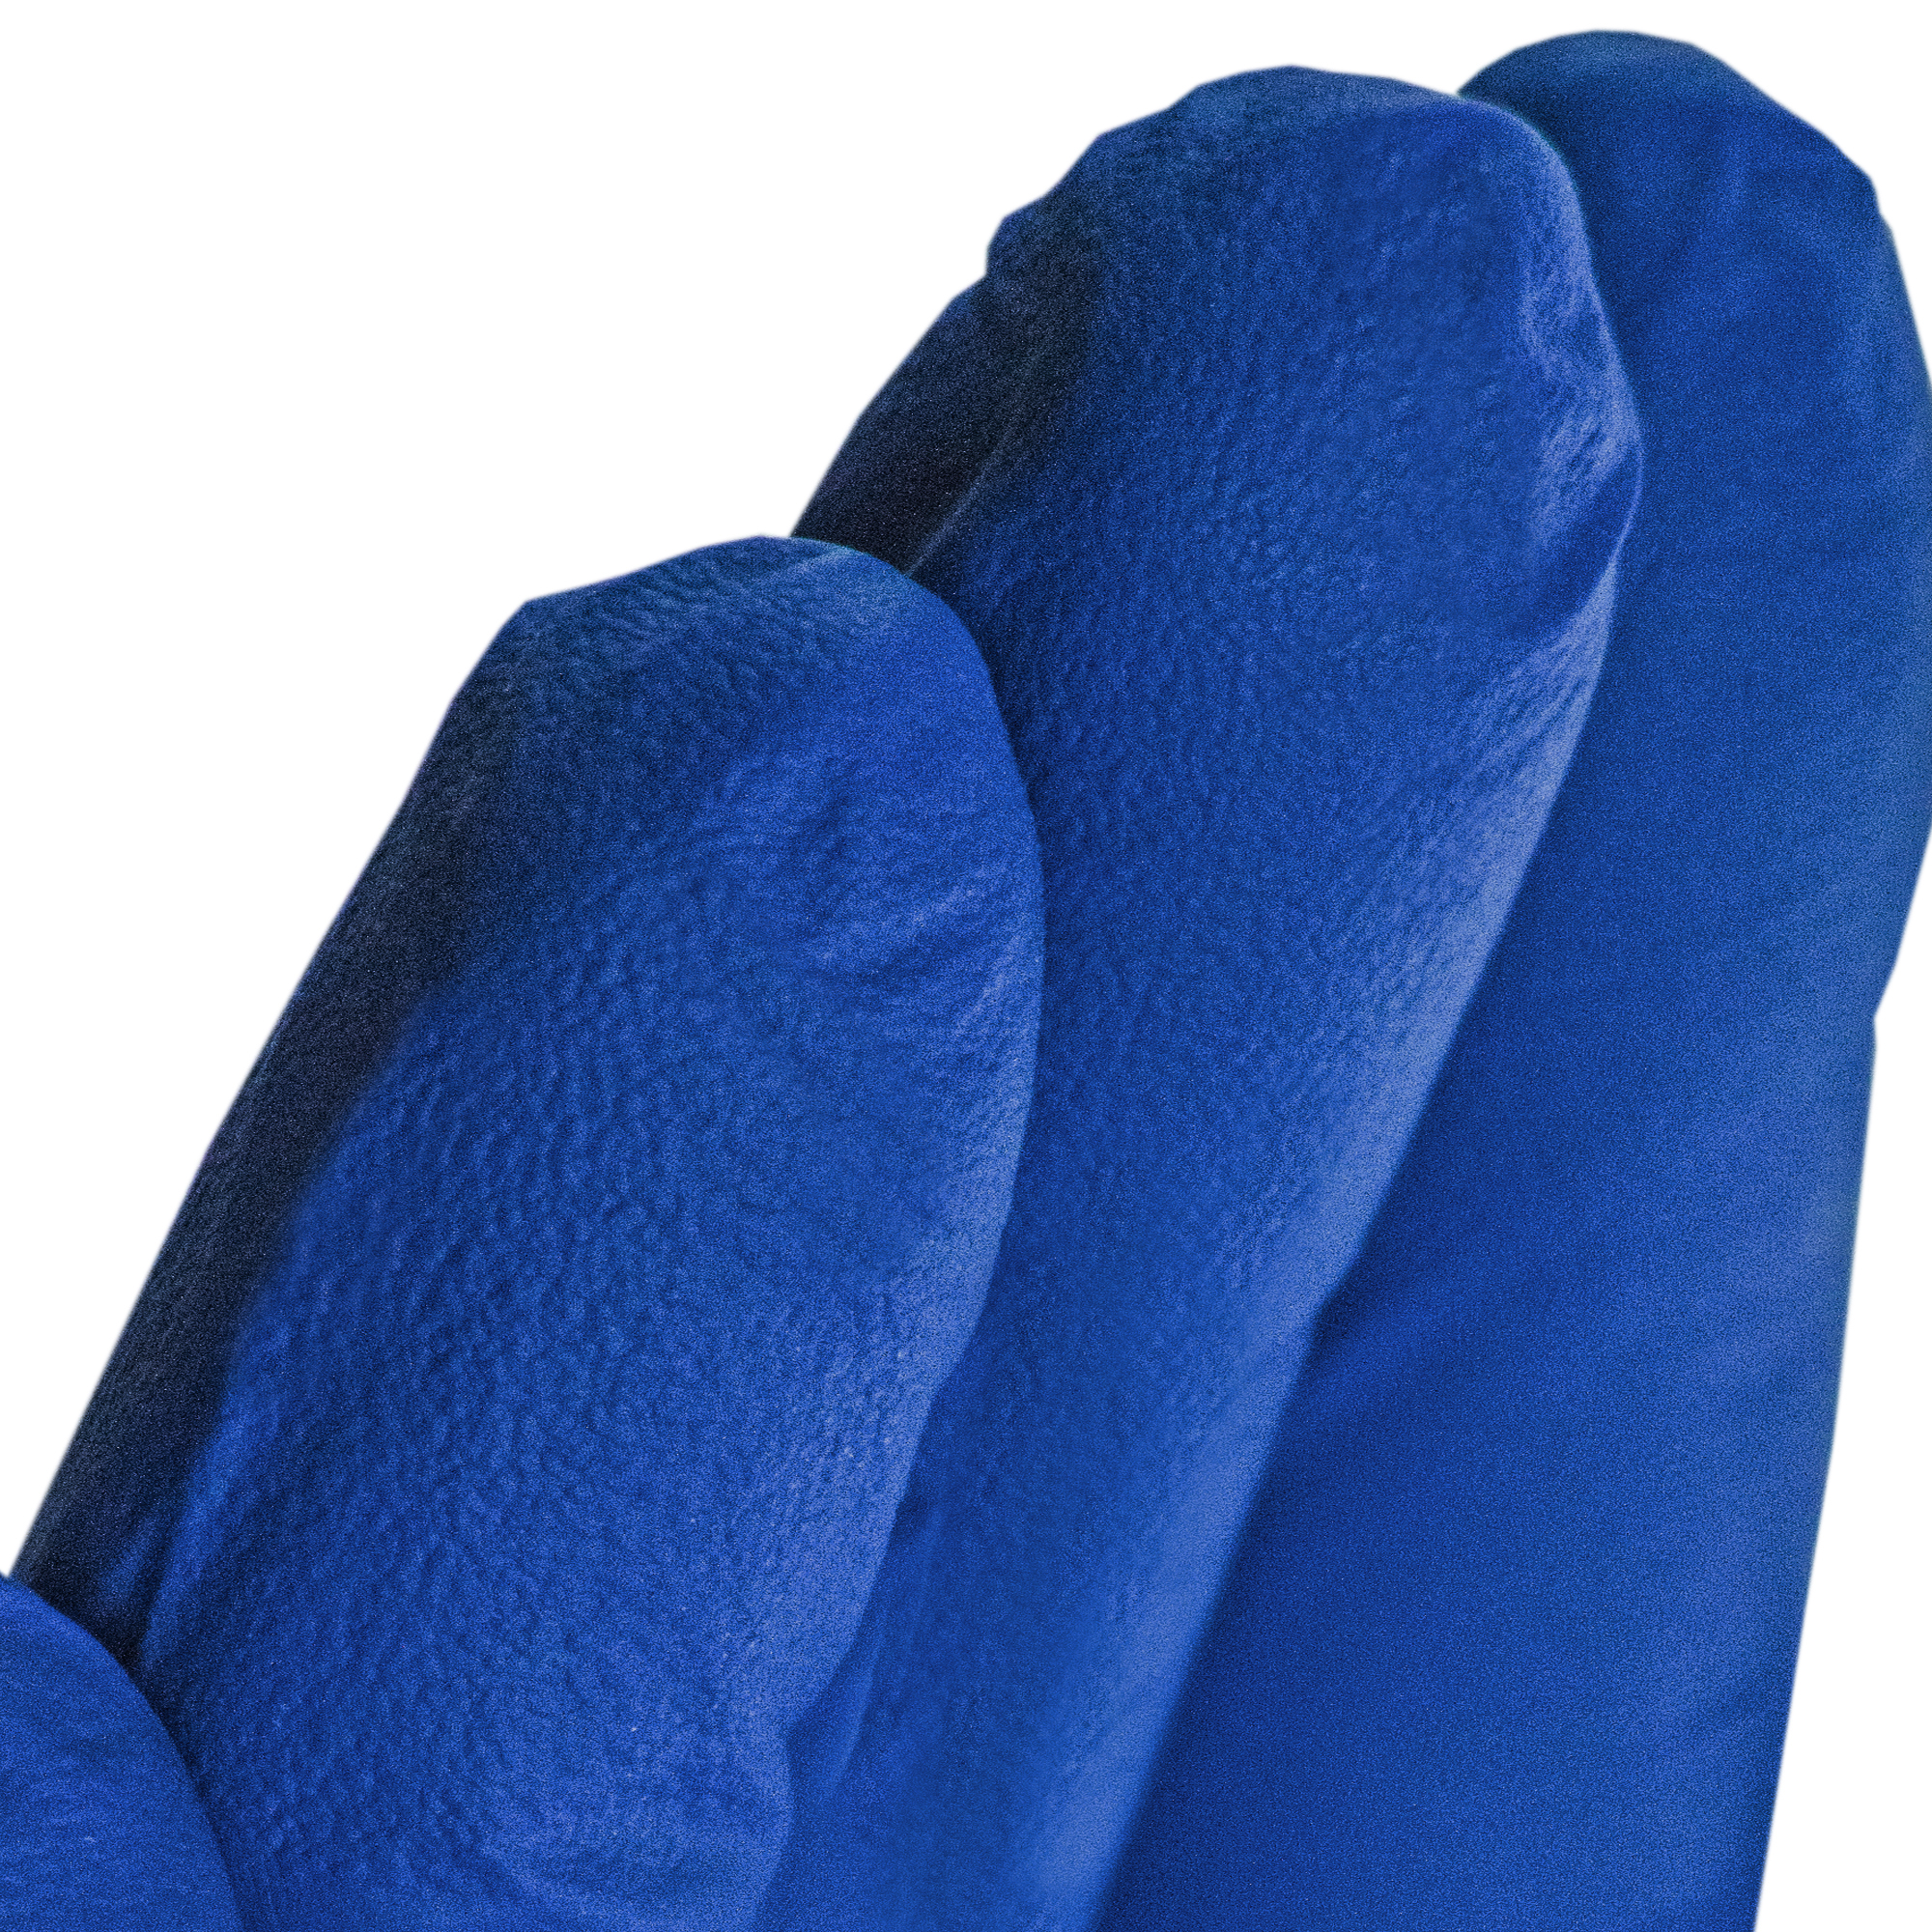 Picture of Exam Glove, XL, Latex,  Powder-Free, 50 EA/BX